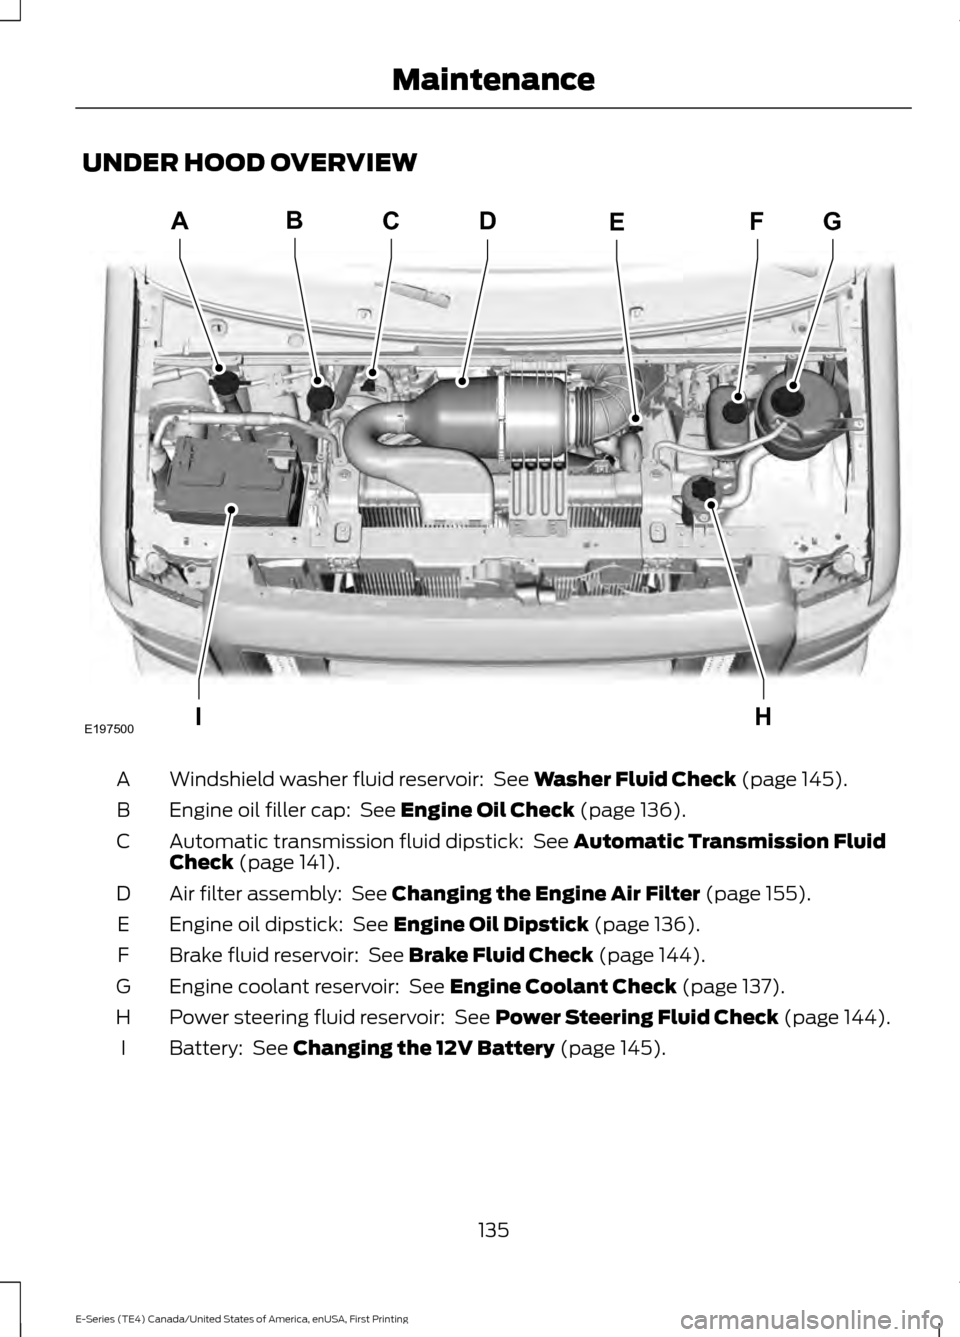 FORD E SERIES 2017 4.G Owners Manual UNDER HOOD OVERVIEW
Windshield washer fluid reservoir:  See Washer Fluid Check (page 145).
A
Engine oil filler cap: 
 See Engine Oil Check (page 136).
B
Automatic transmission fluid dipstick: 
 See Au